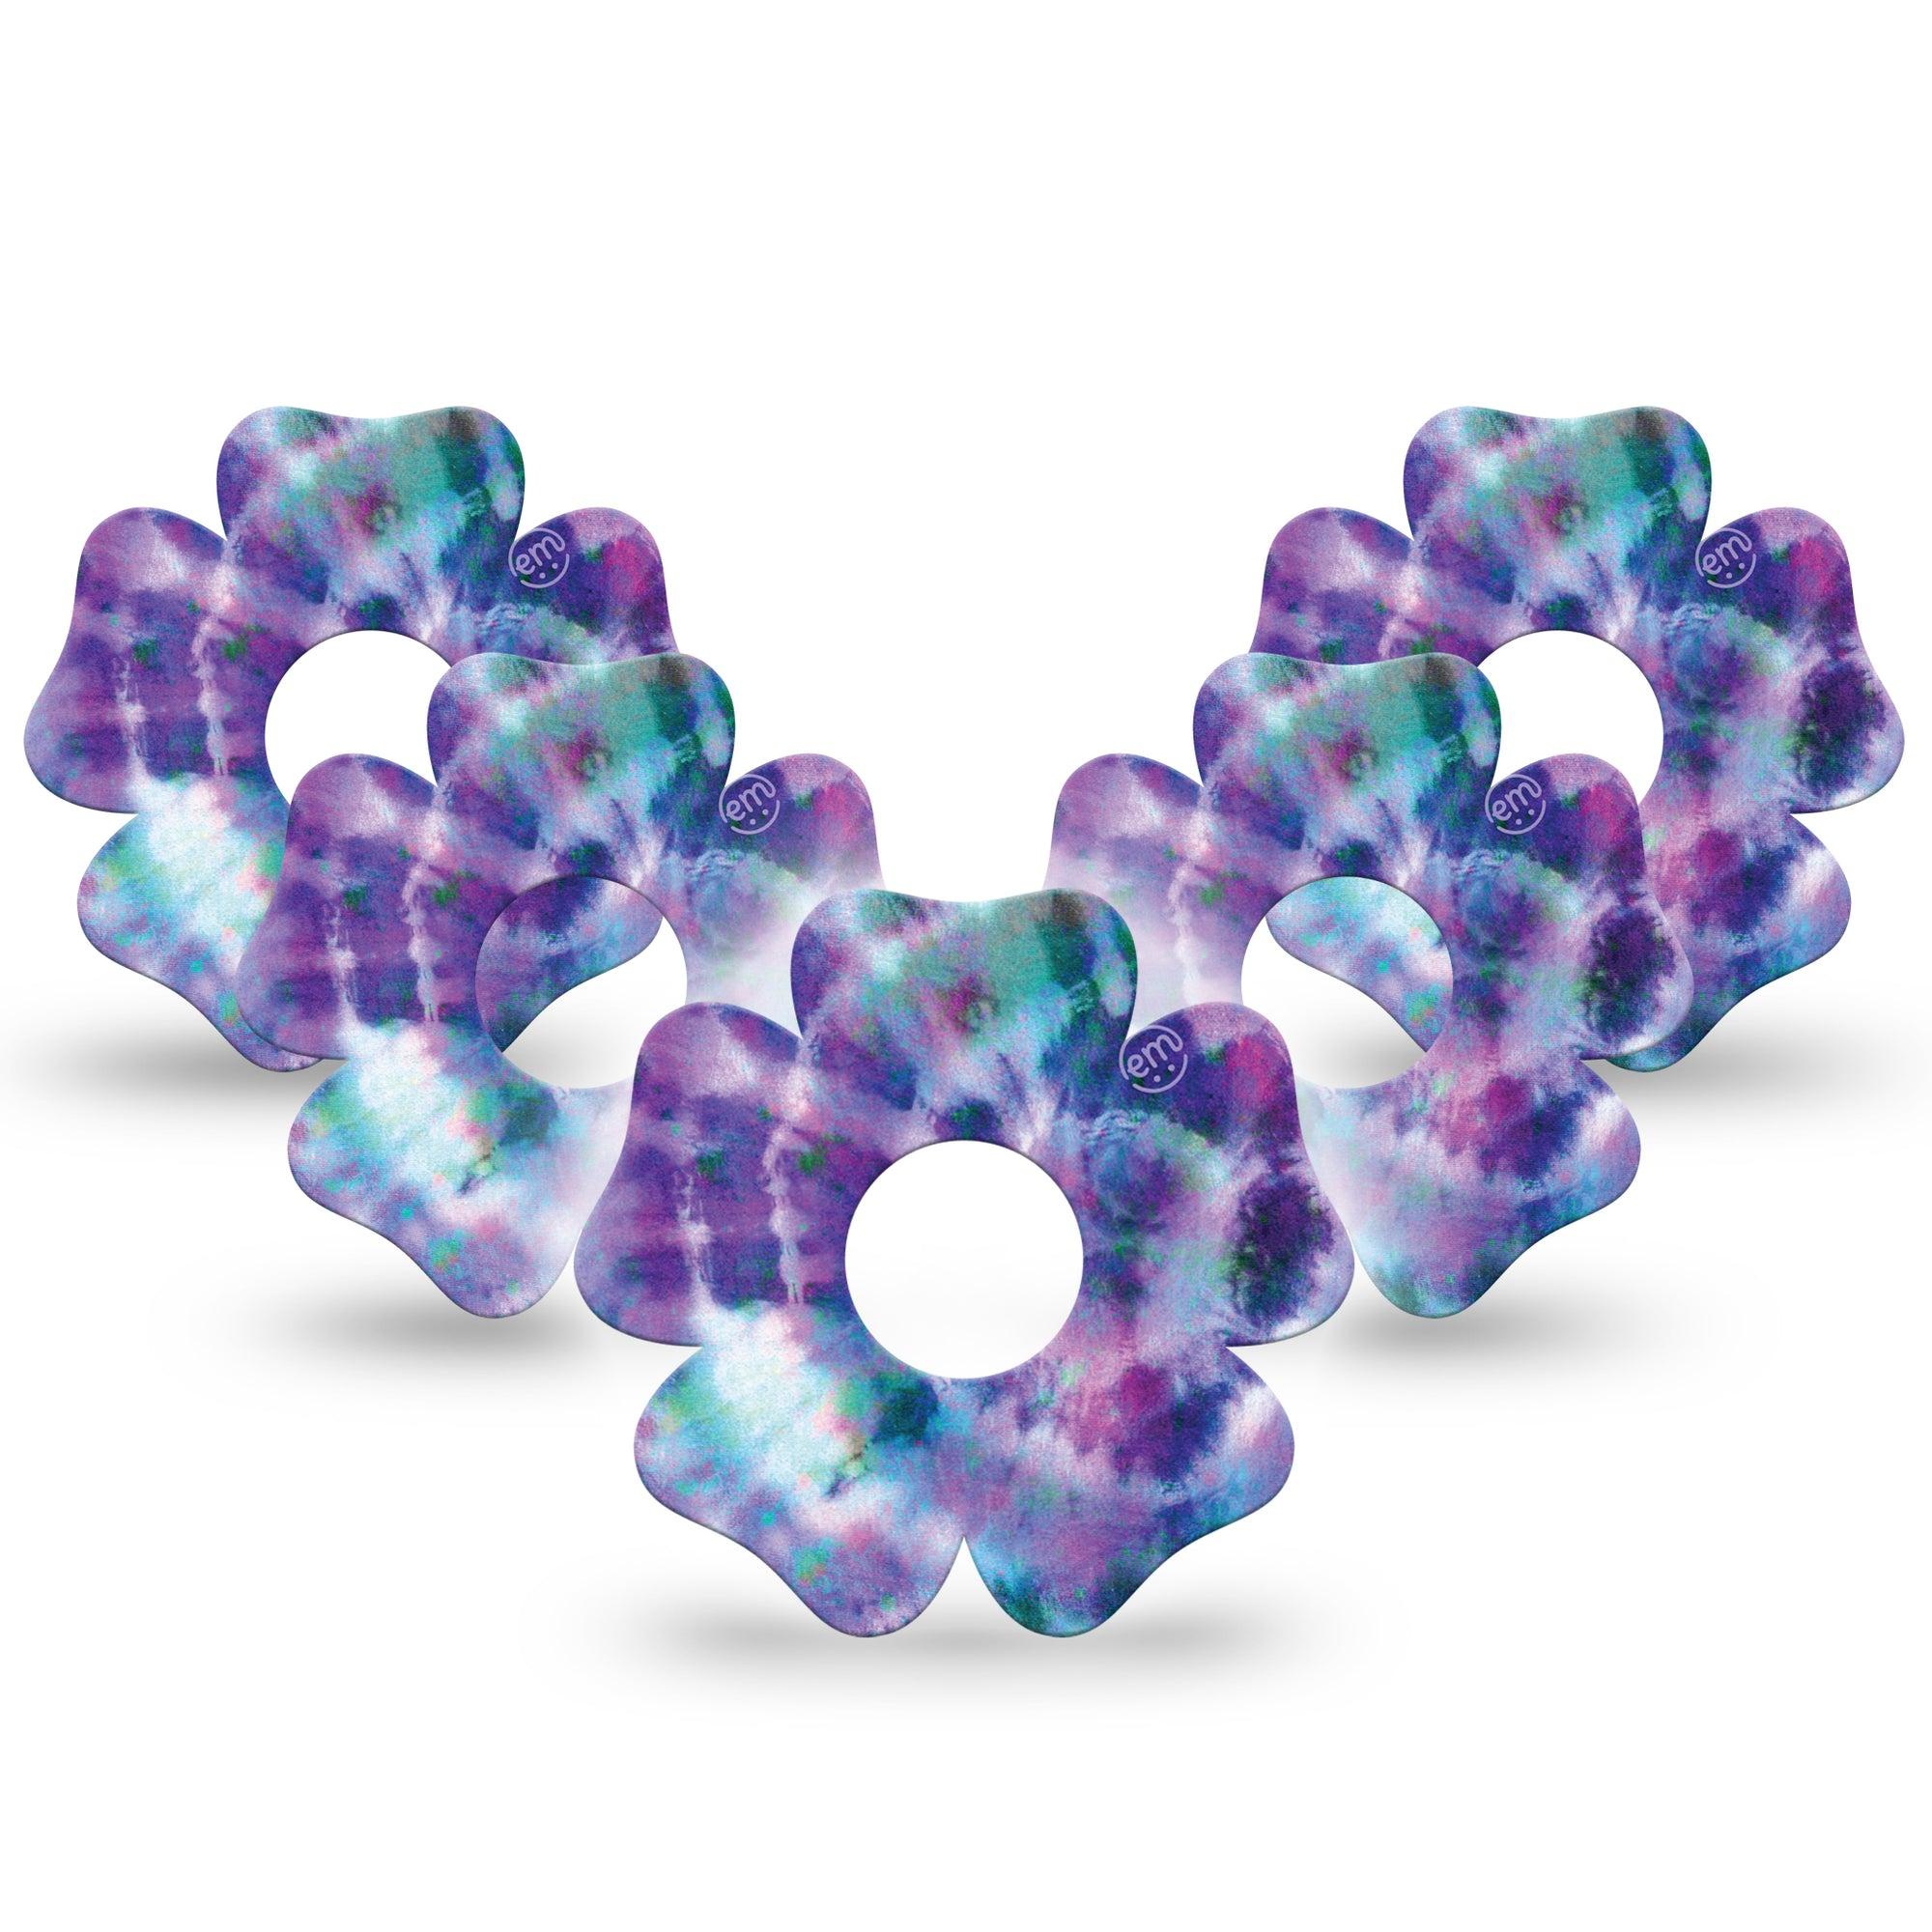 ExpressionMed Purple Tie Dye Flower Libre 3 Tape, 5-Pack, Tie Dye Folding Inspired, CGM Overlay Patch Design